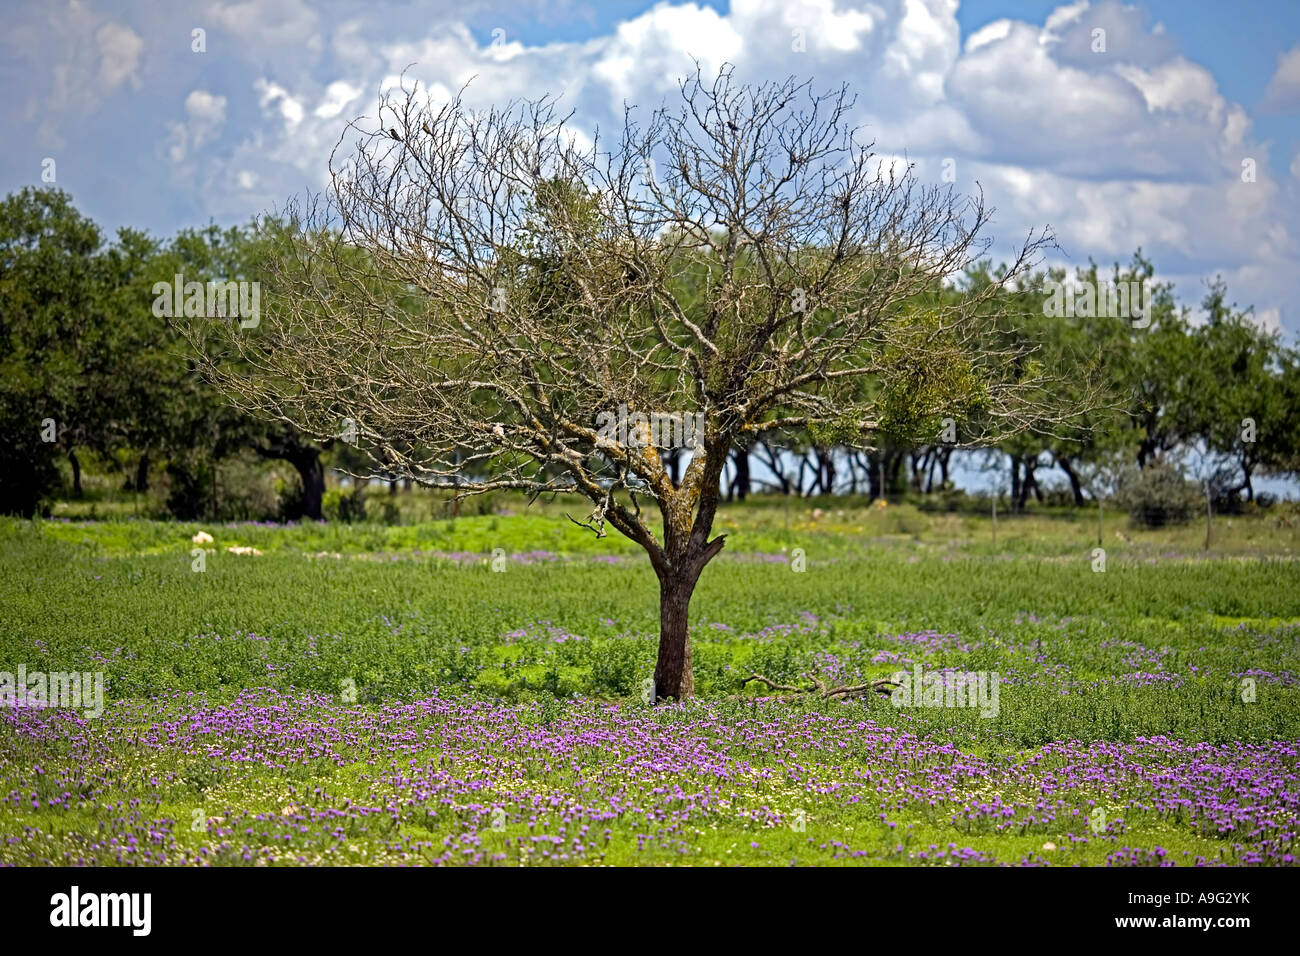 Field of bluebonnets wildflowers Lupinus texensis near Fredericksburg in the Hill Country of Texas Stock Photo